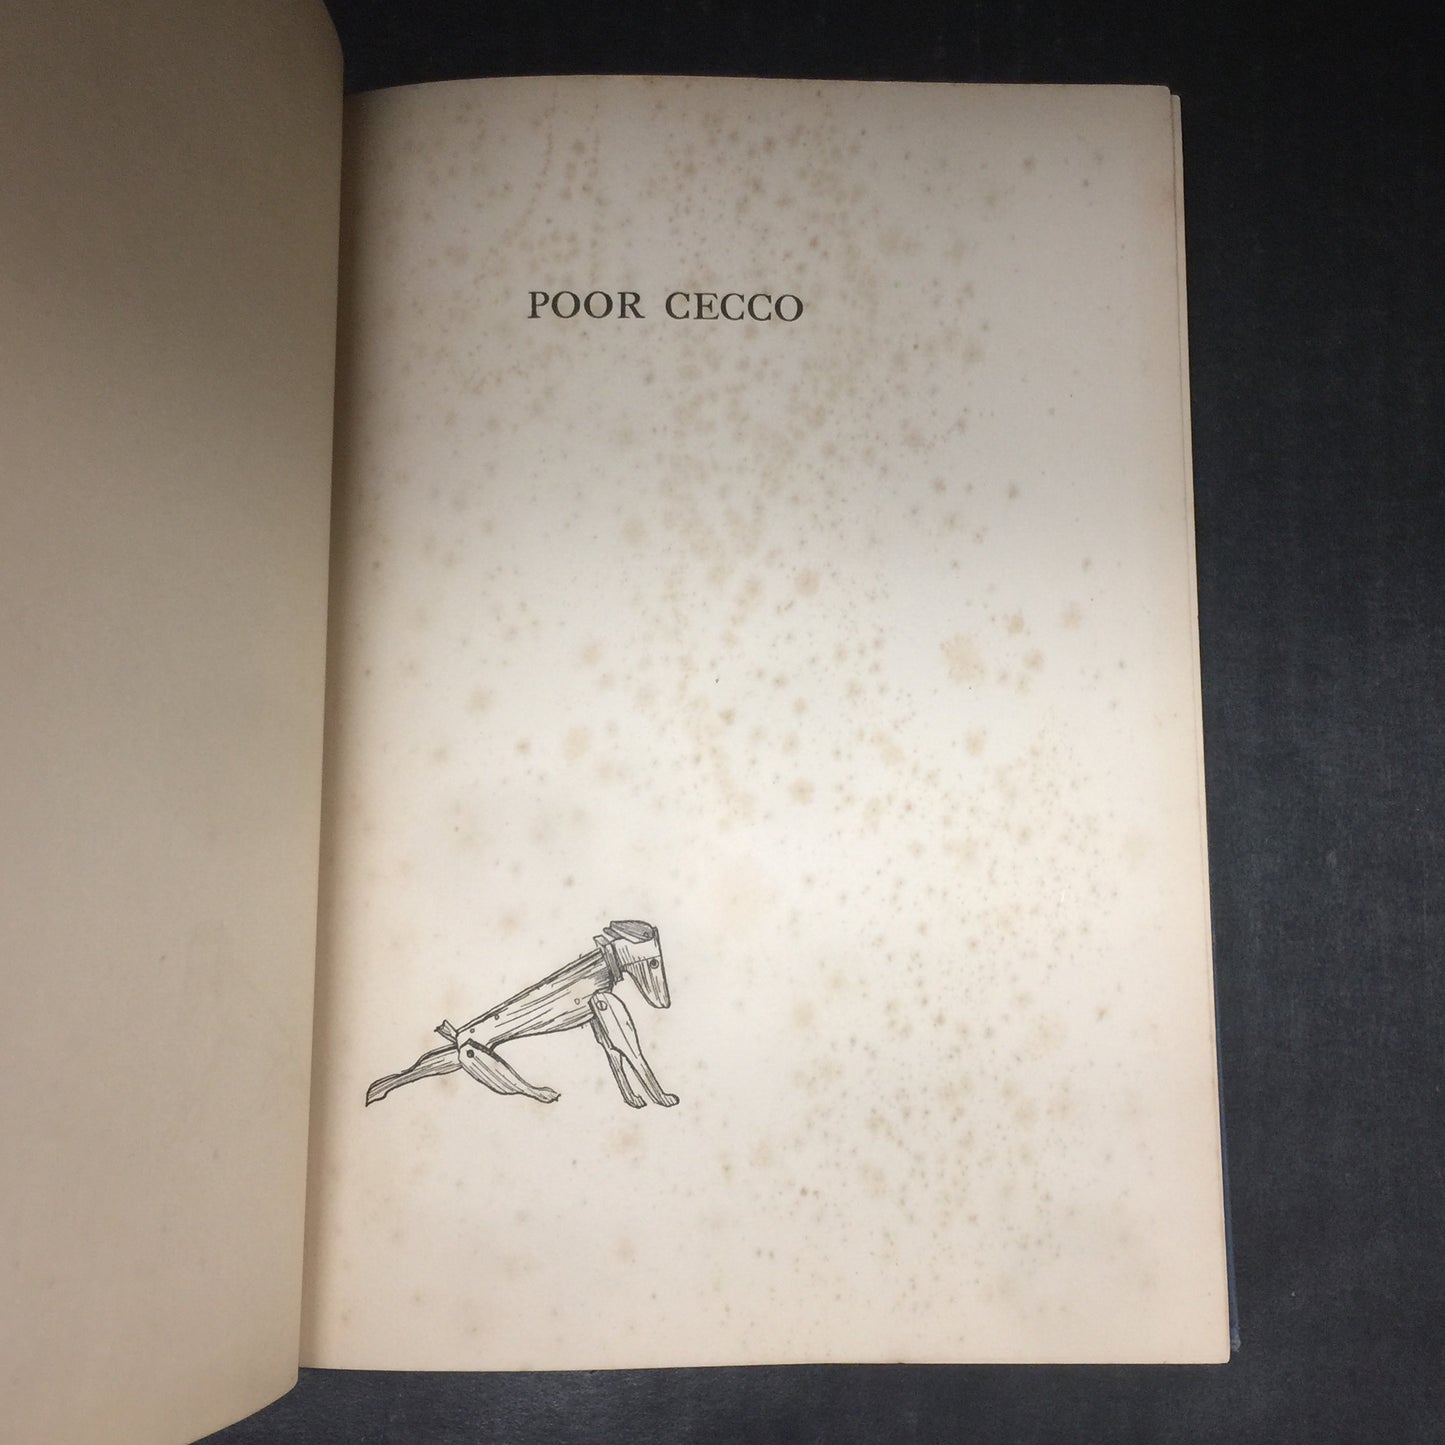 Poor Cecco - Margery Williams Bianco - First Edition - 1925